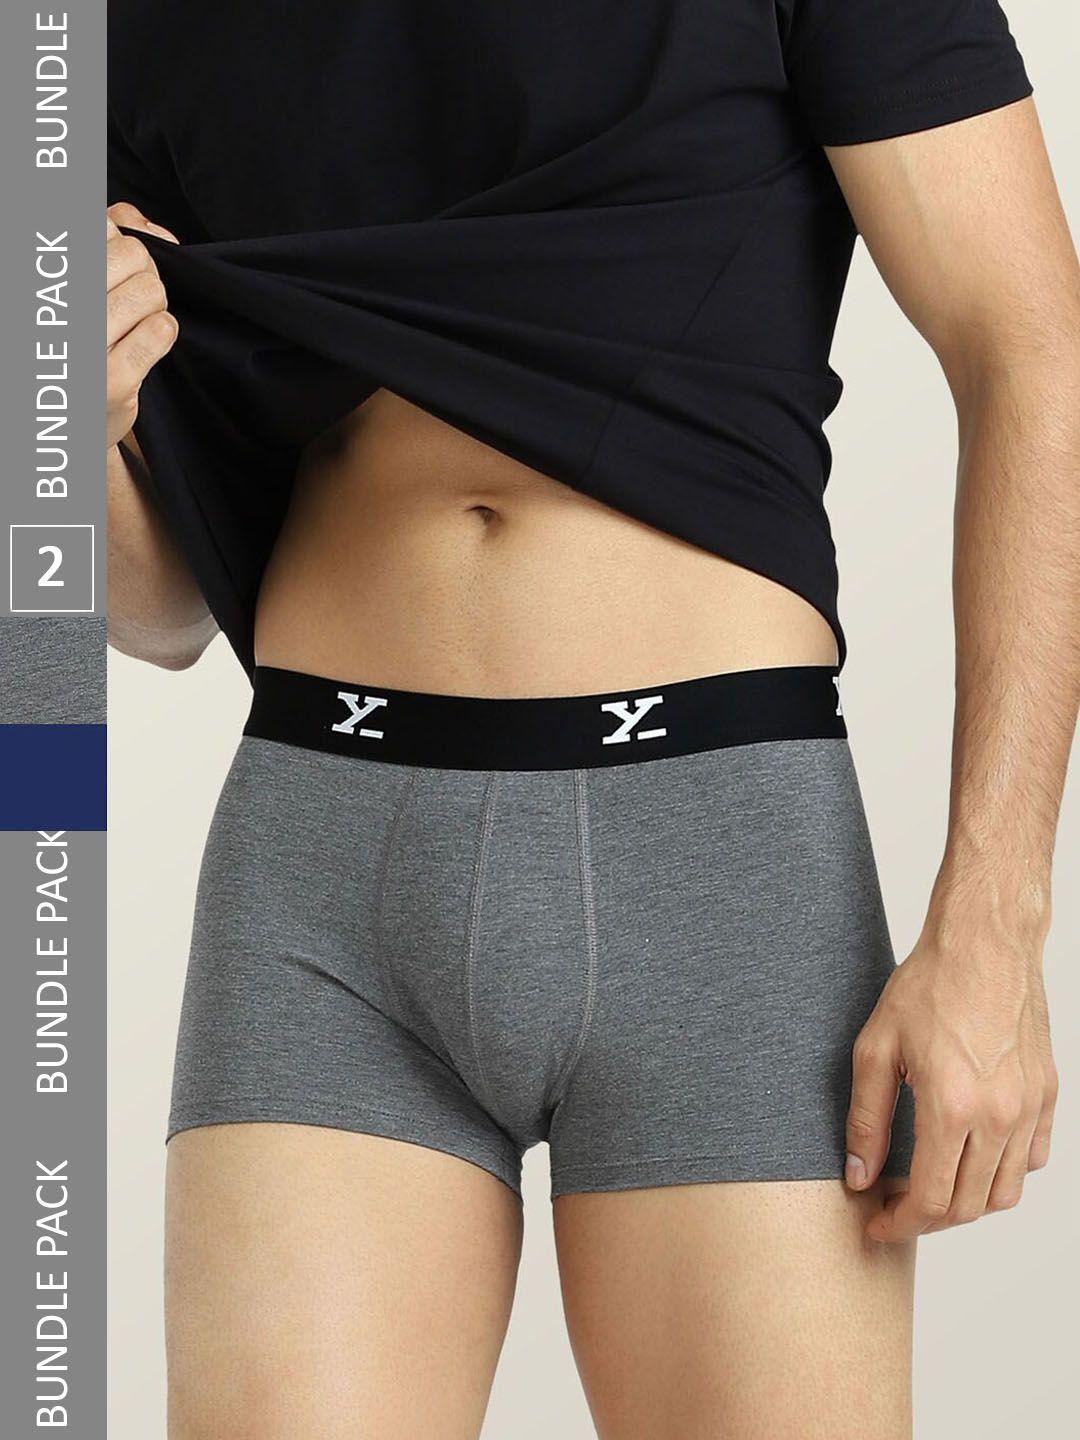 xyxx pack of 2 trunks xytrnk2pckn569